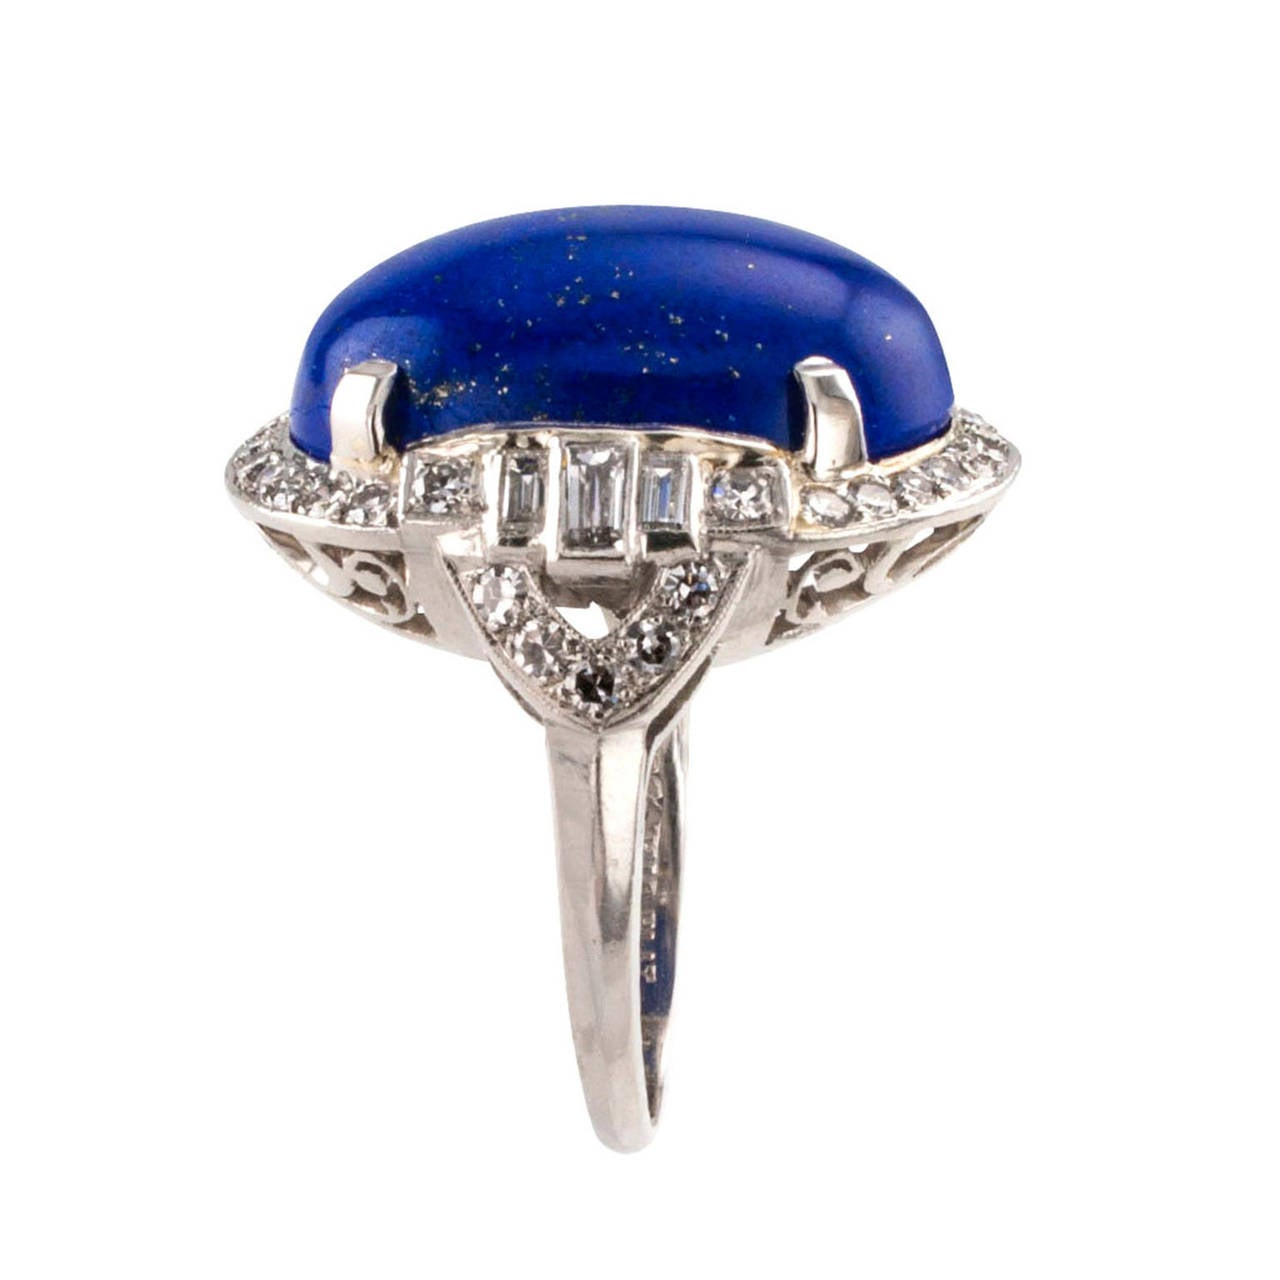 Lapis Lazuli and Diamond Dress Ring Circa 1950

A very smart looking ring set with a beautiful lapis lazuli oval cabochon, within a conforming diamond border characterized by geometric motifs, the forty-four baguette and circular-cut diamonds